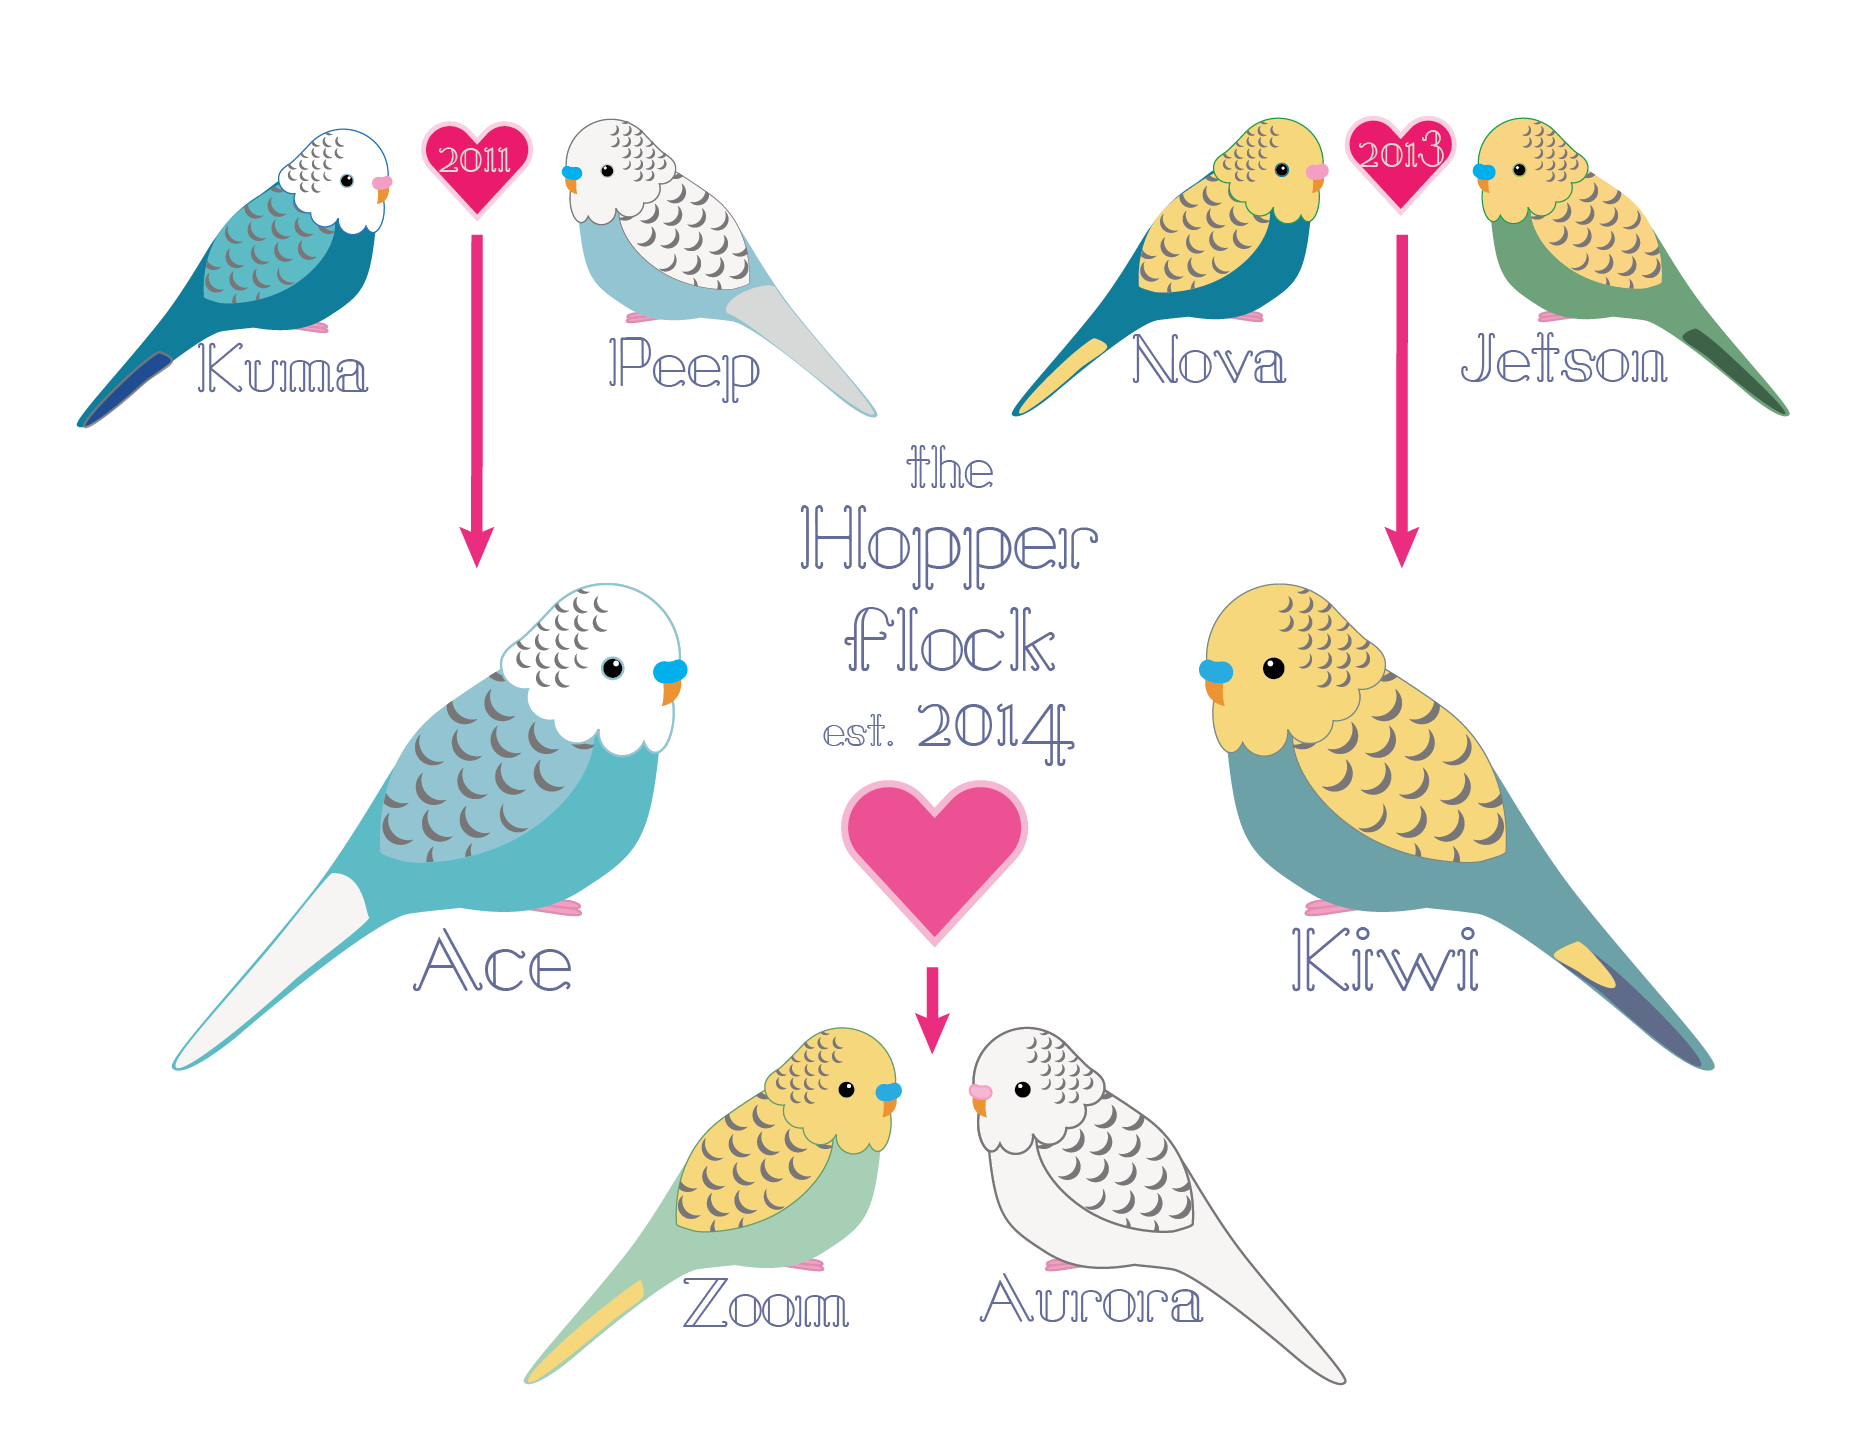 My wife made a really cute Budgie family tree! : budgies